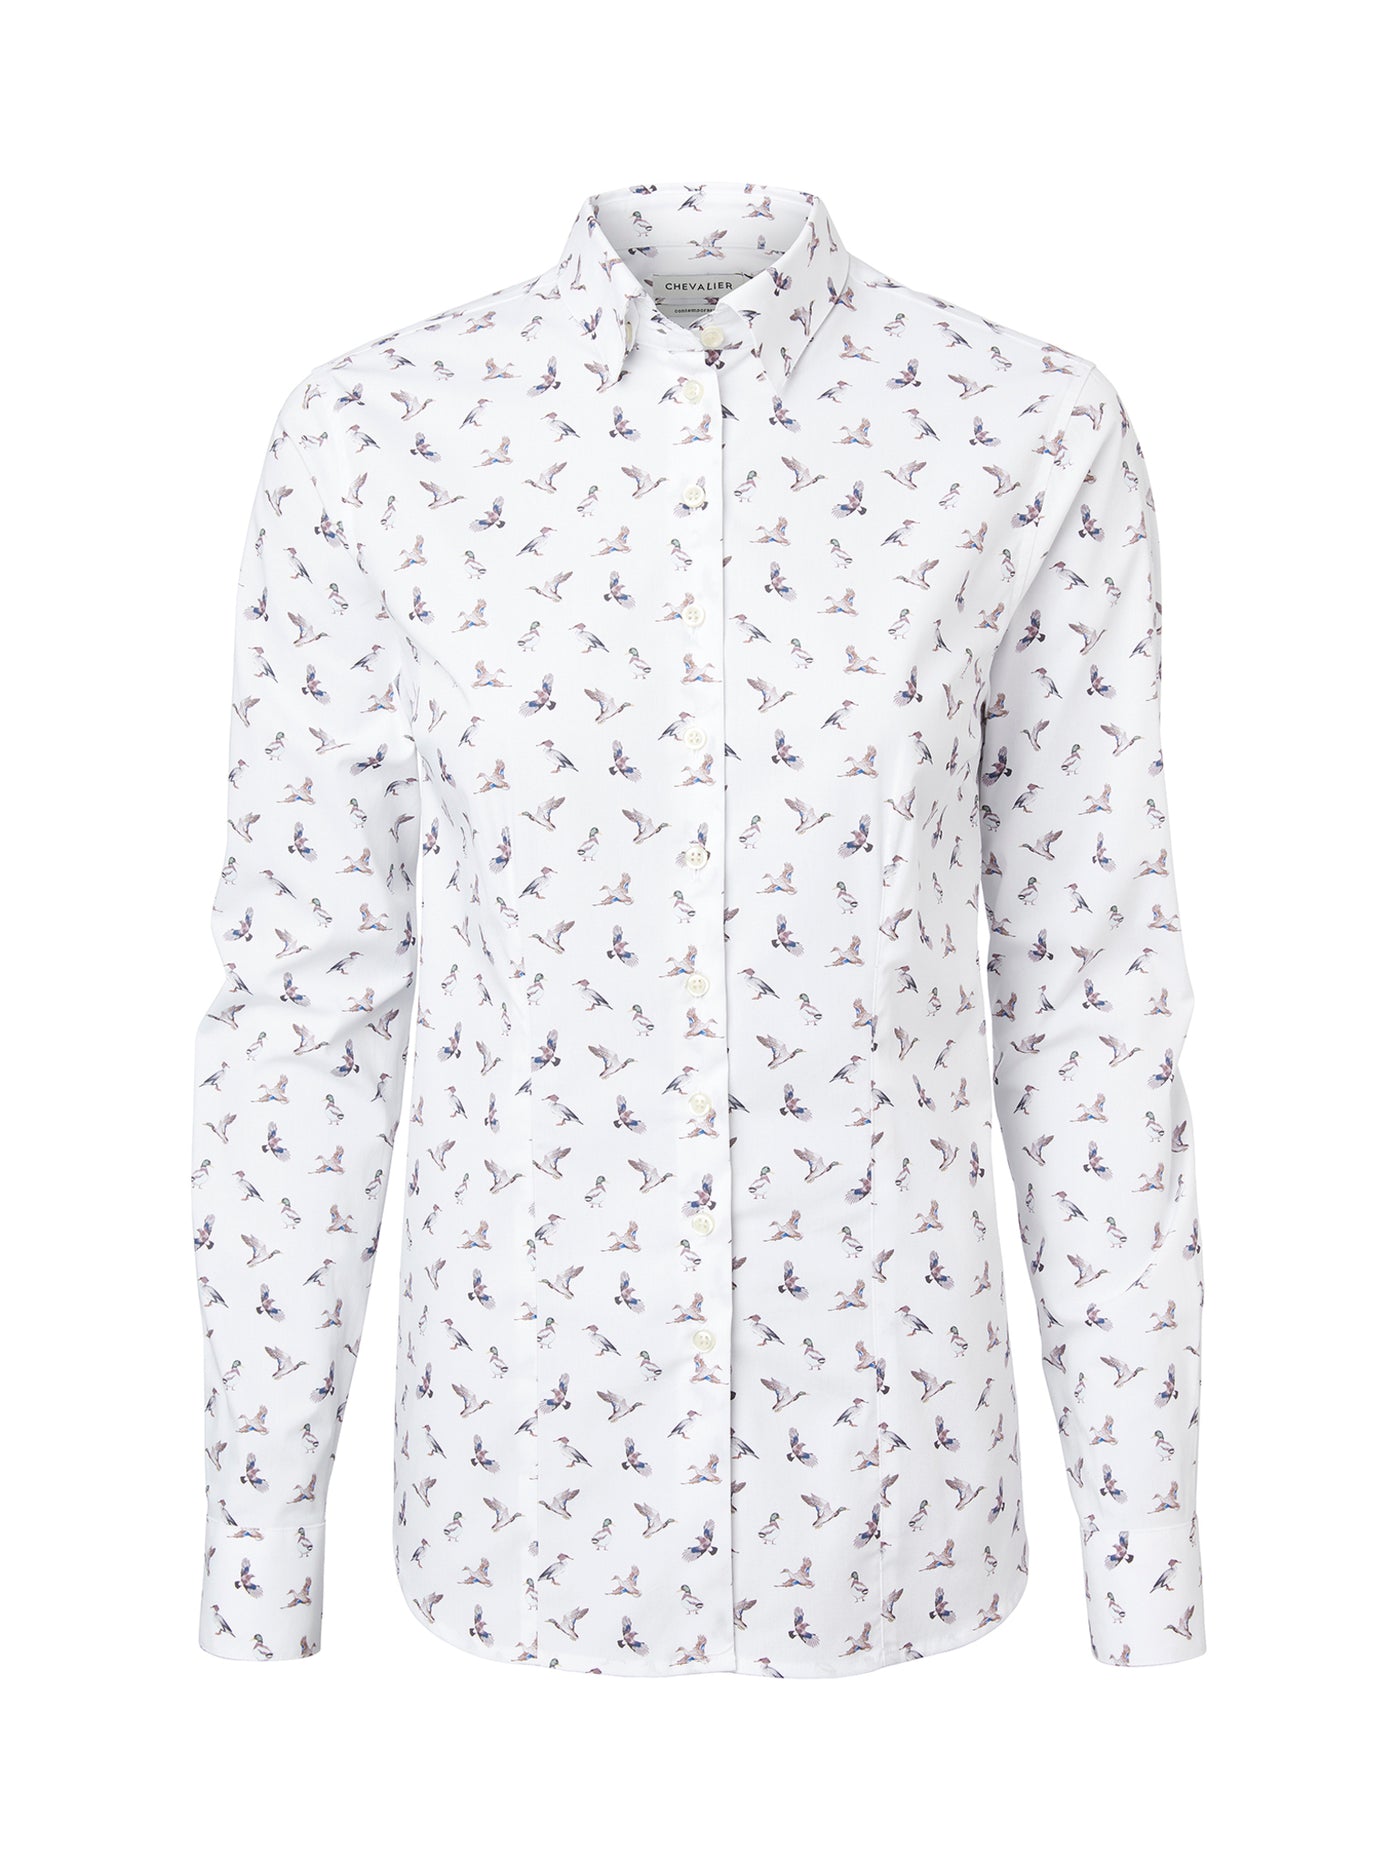 Chevalier Lindsey Contemporary Fit Shirt Women, Ducks and friends